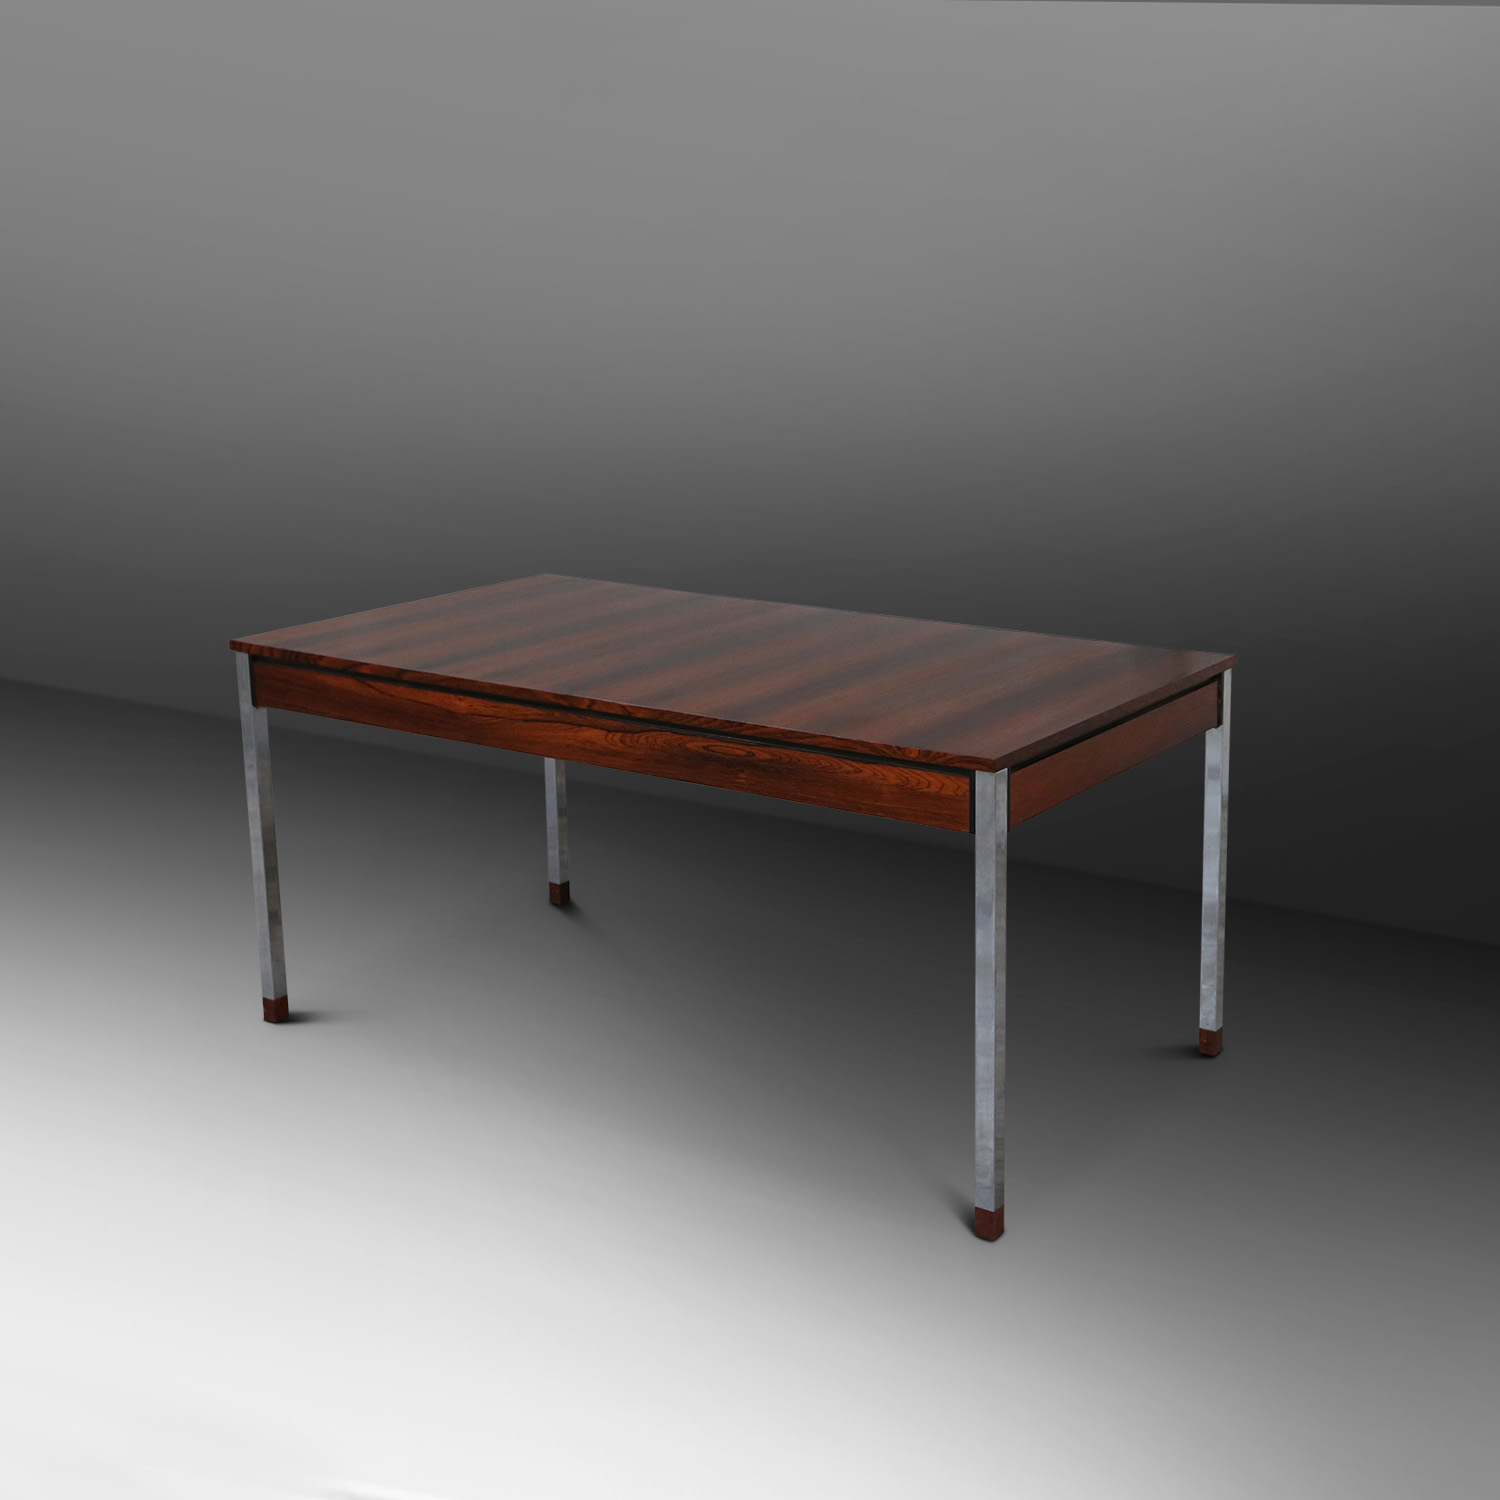 Dining table by Alfred Hendrickx 1960'sthumbnail